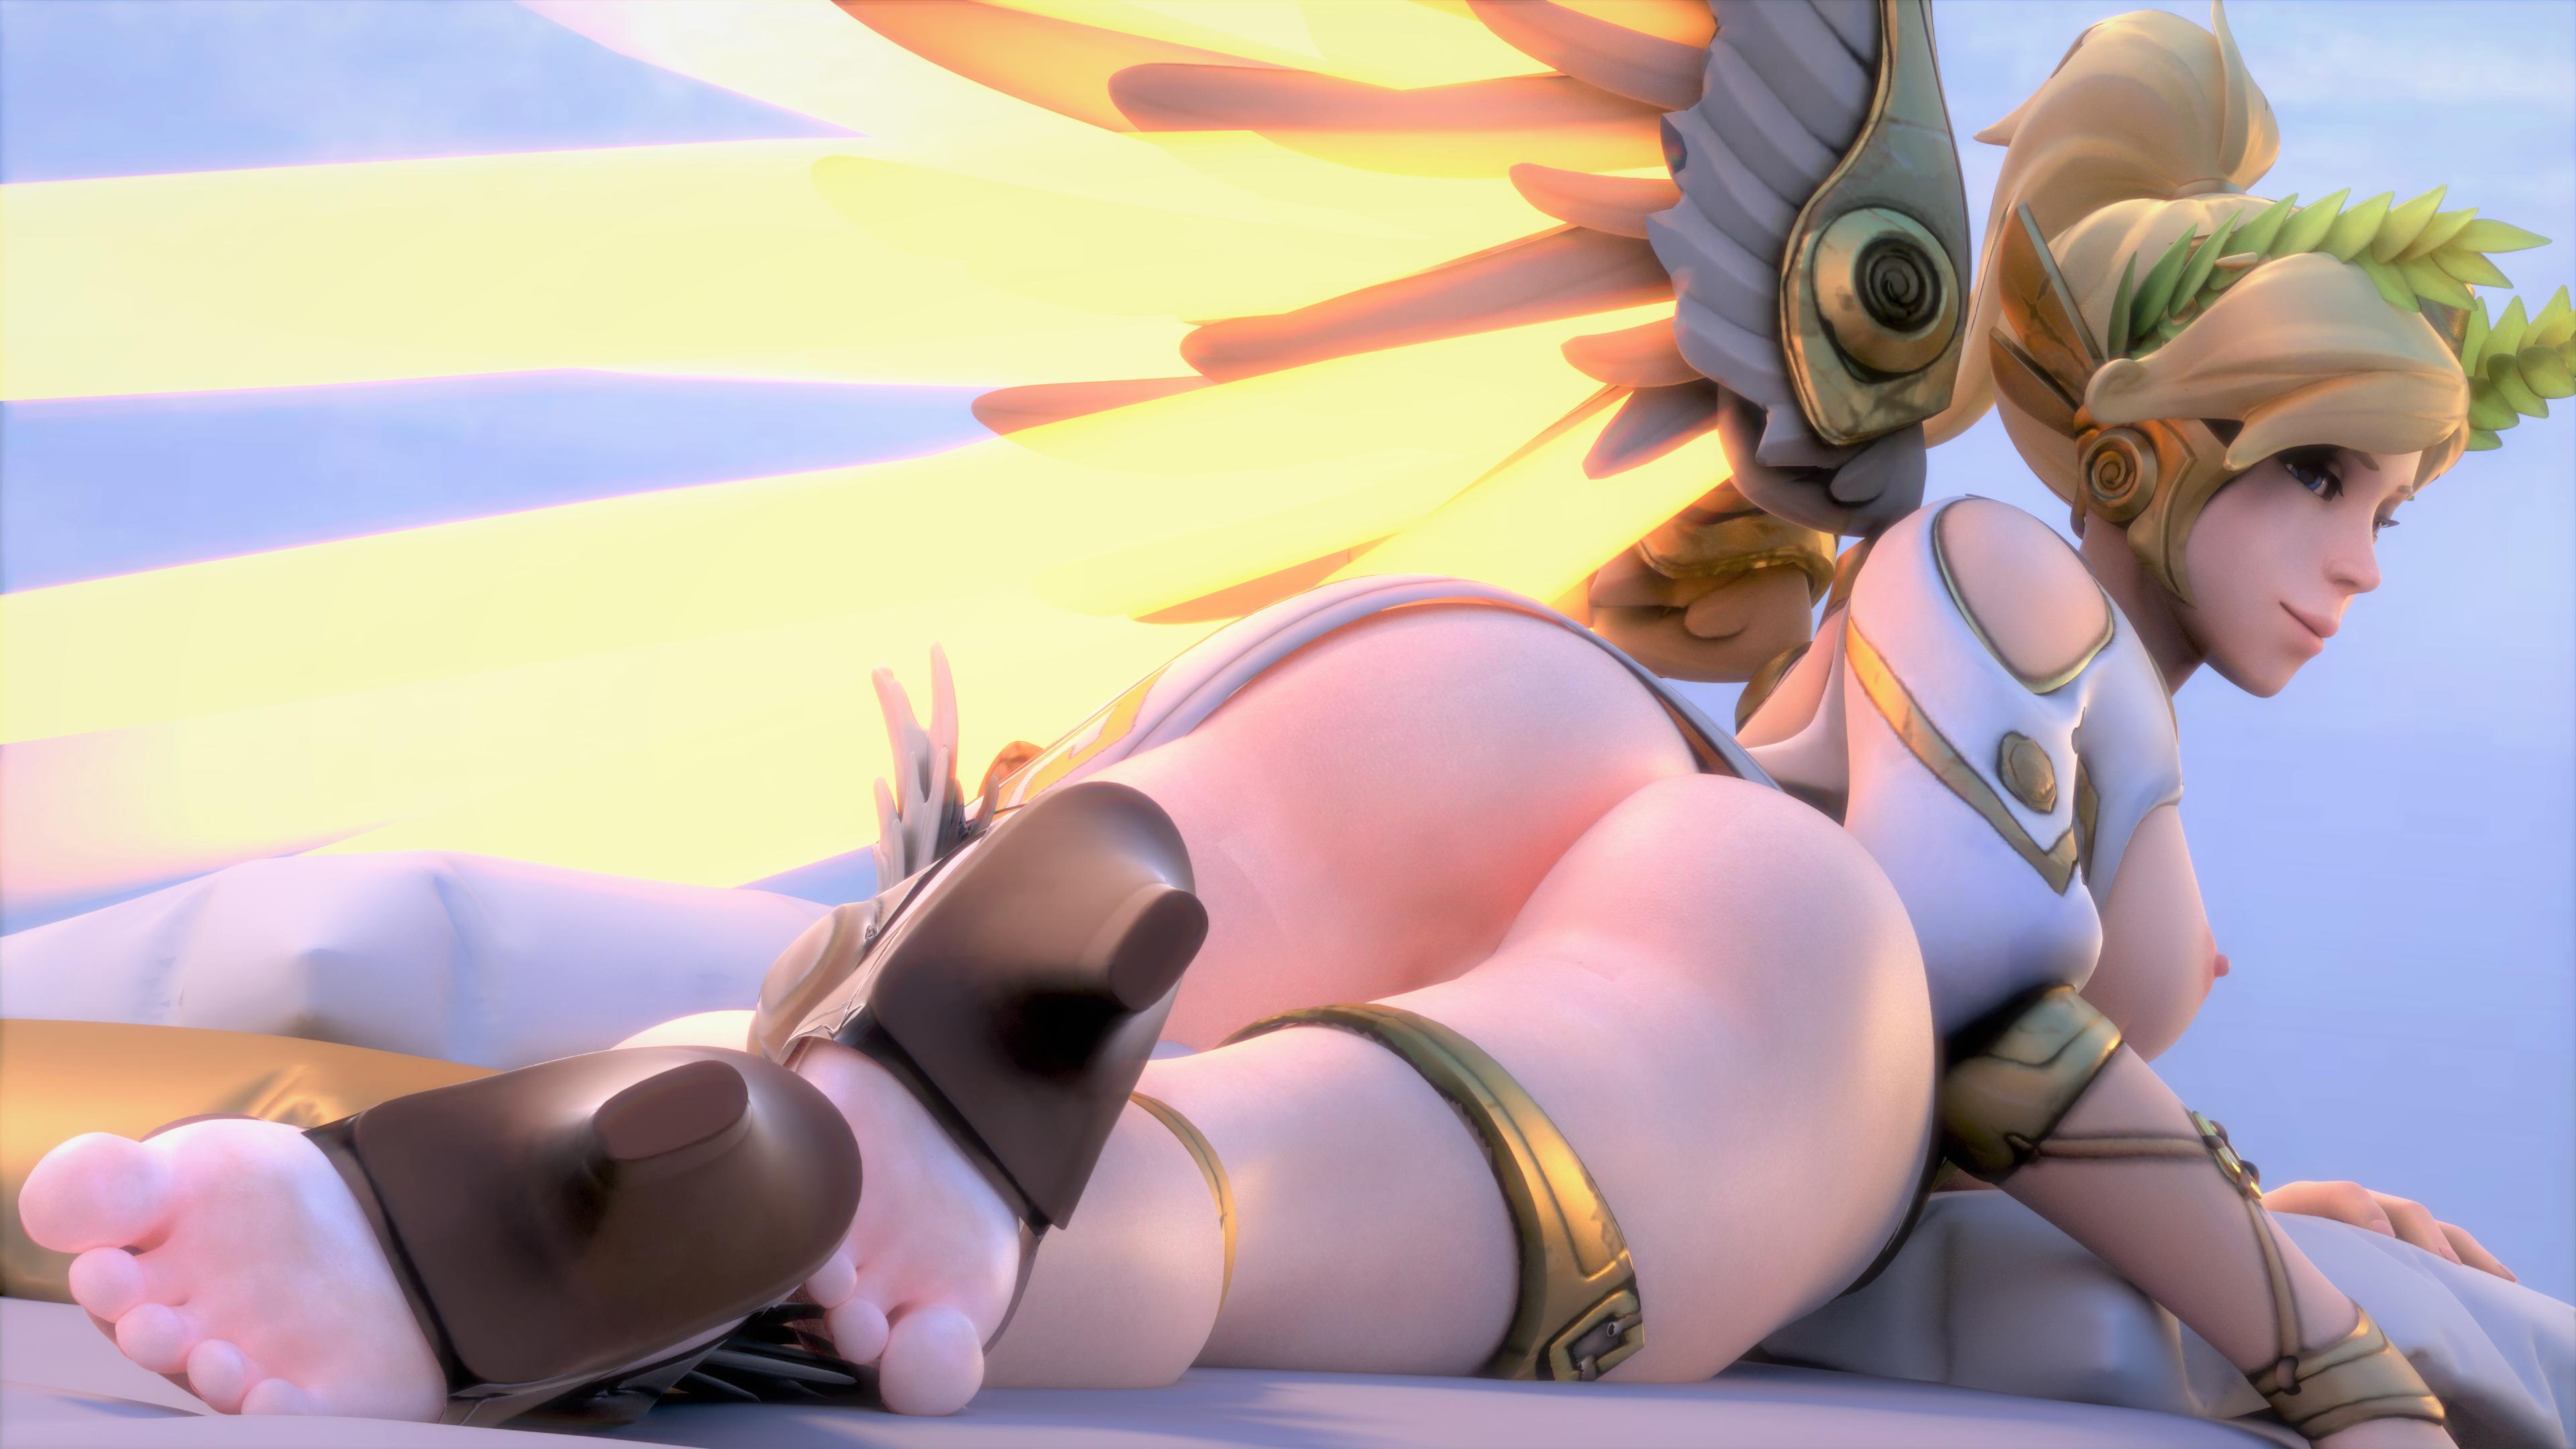 Mercy winged victory